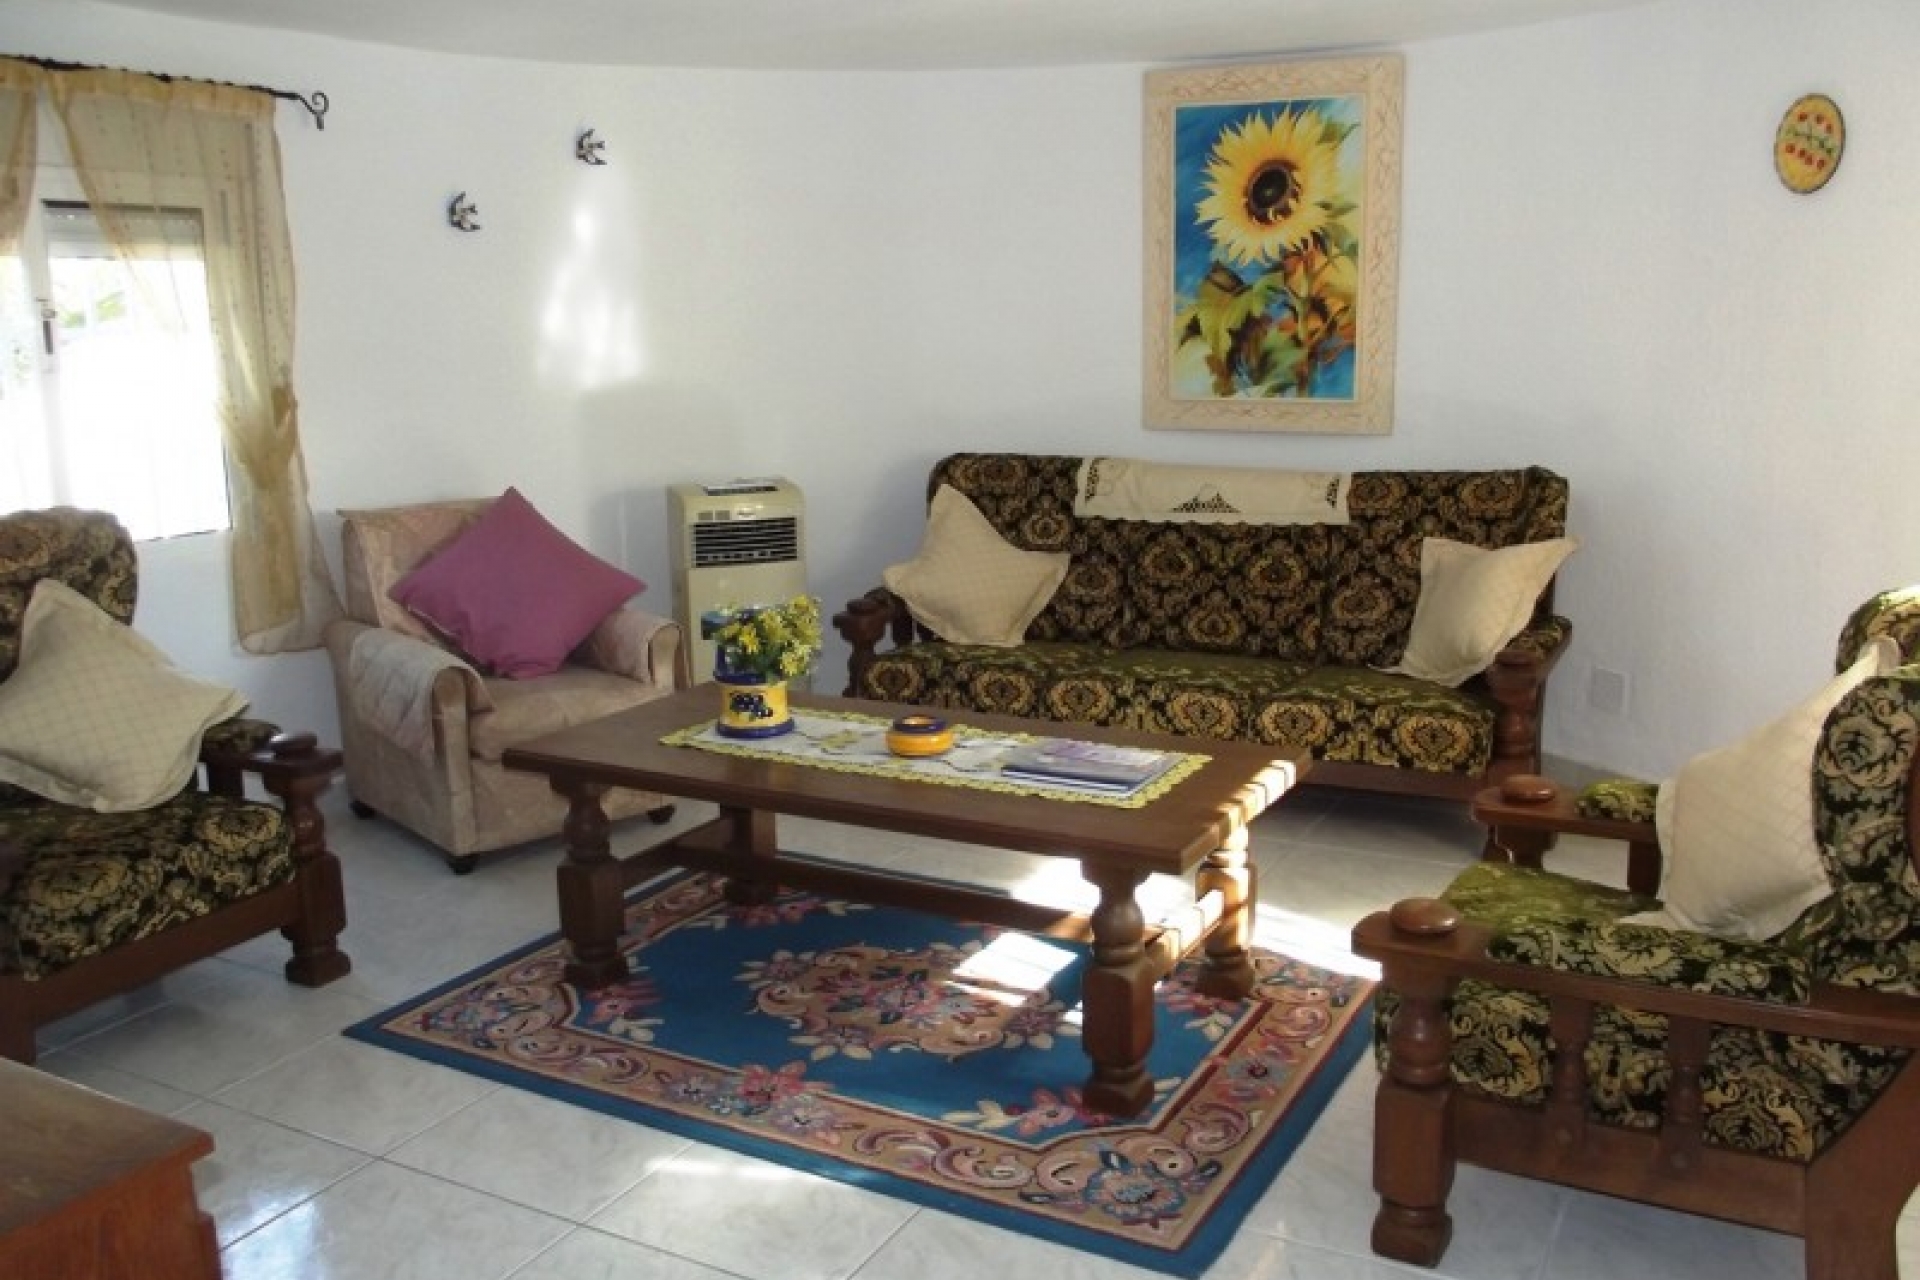 For sale cheap bargain Spain costa blanca property